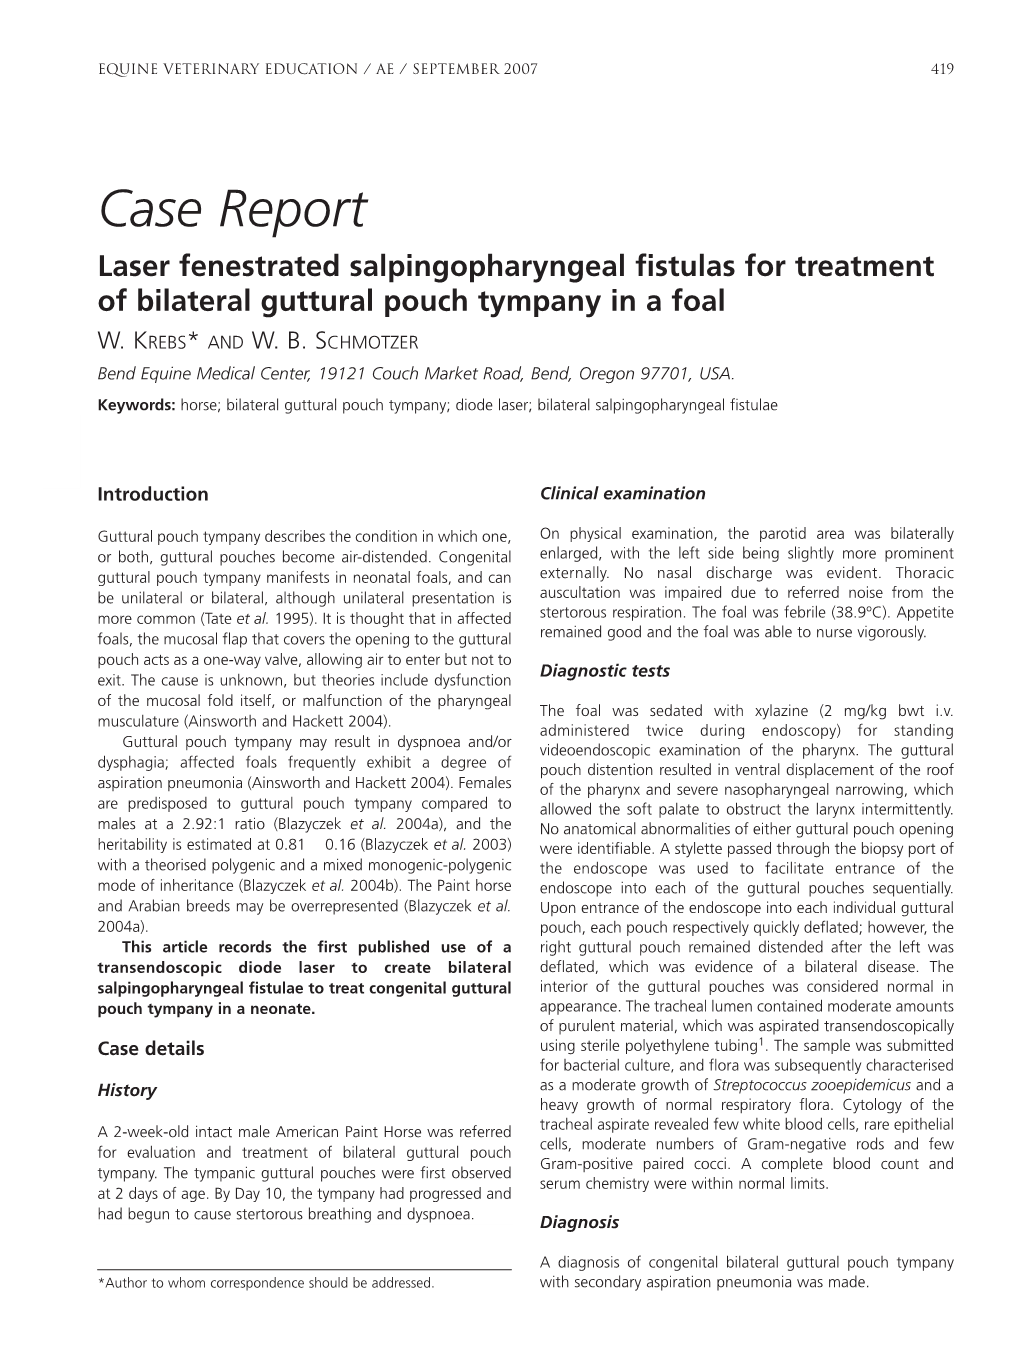 Case Report Laser Fenestrated Salpingopharyngeal Fistulas for Treatment of Bilateral Guttural Pouch Tympany in a Foal W